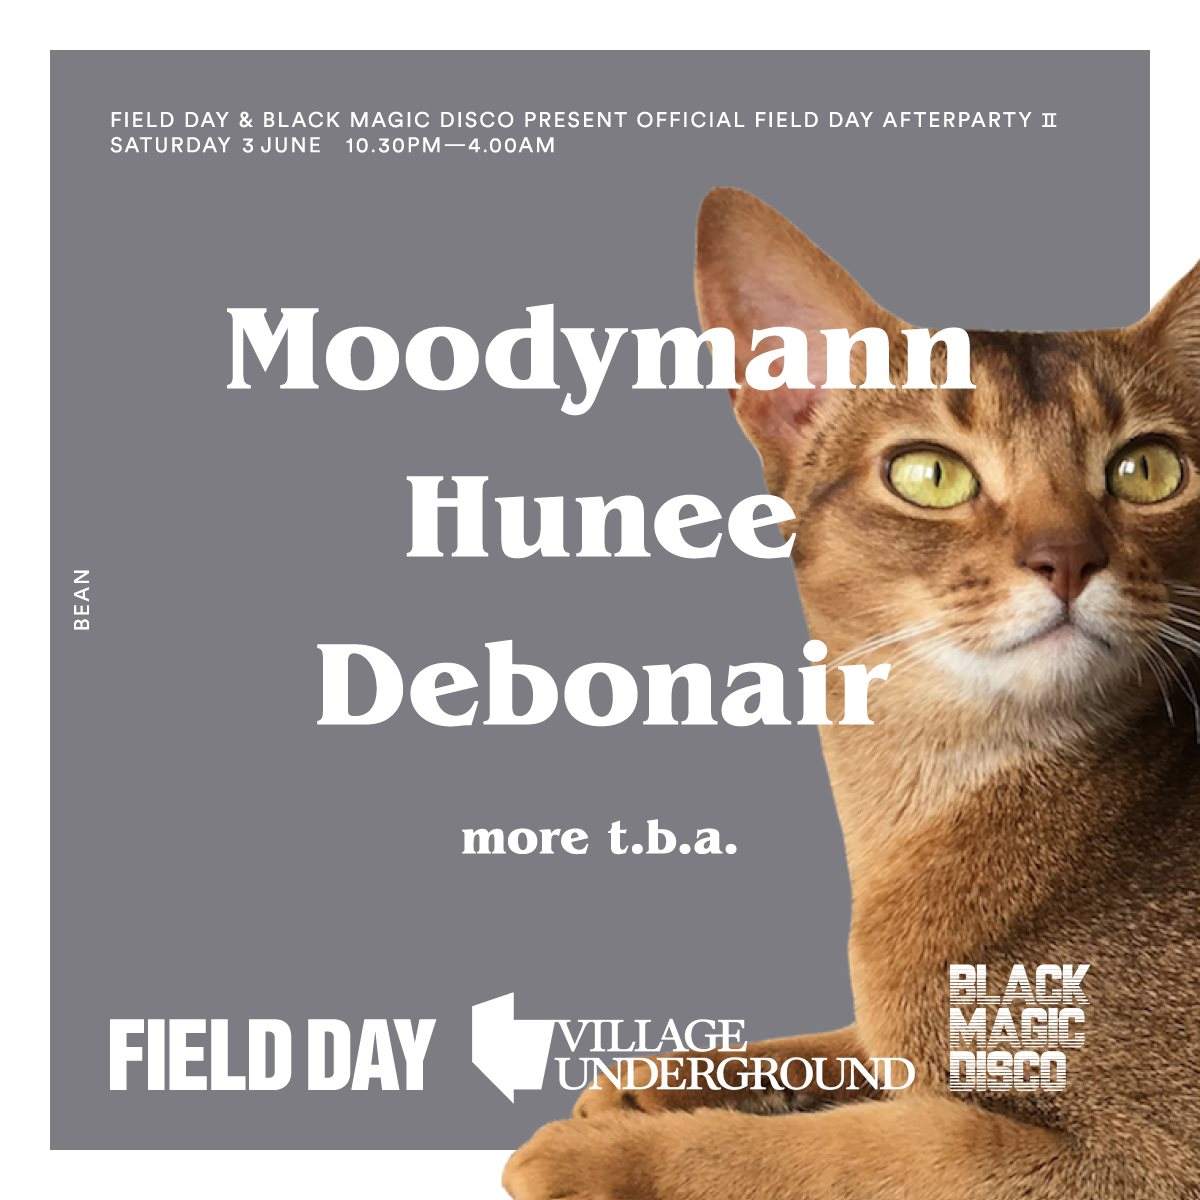 Field Day Official After Party 2 with Black Magic Disco - Moodymann, Hunee - Página frontal